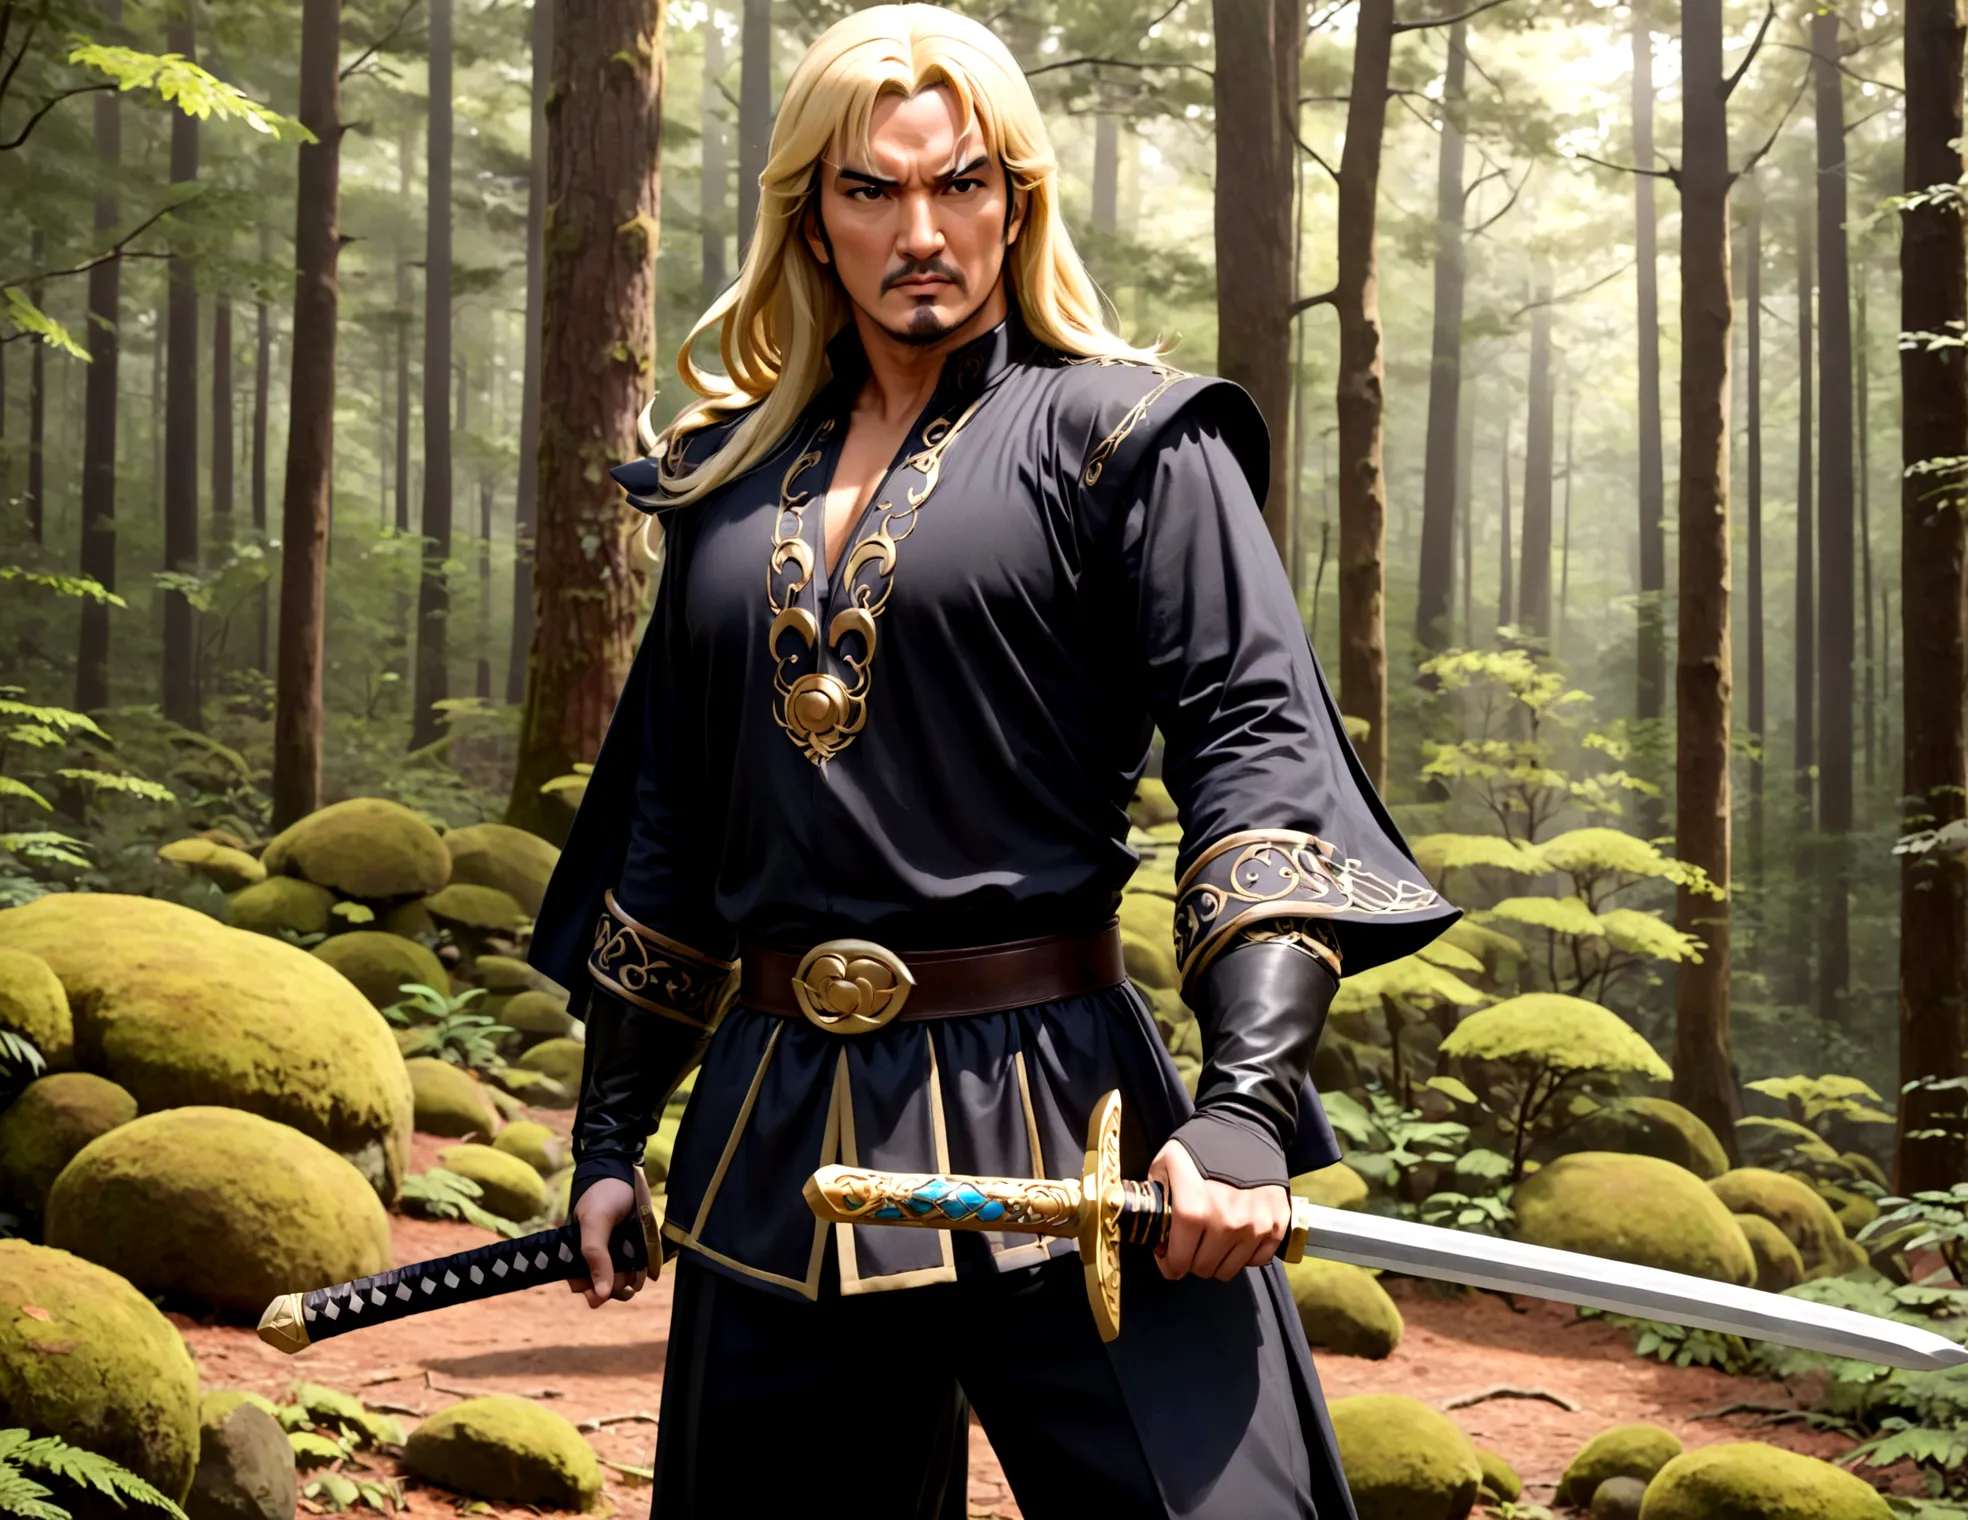 Steven Seagal (current, modern) in the role of Link (Link costume, blonde wig over black hair, wooden sword at side), akido pose...